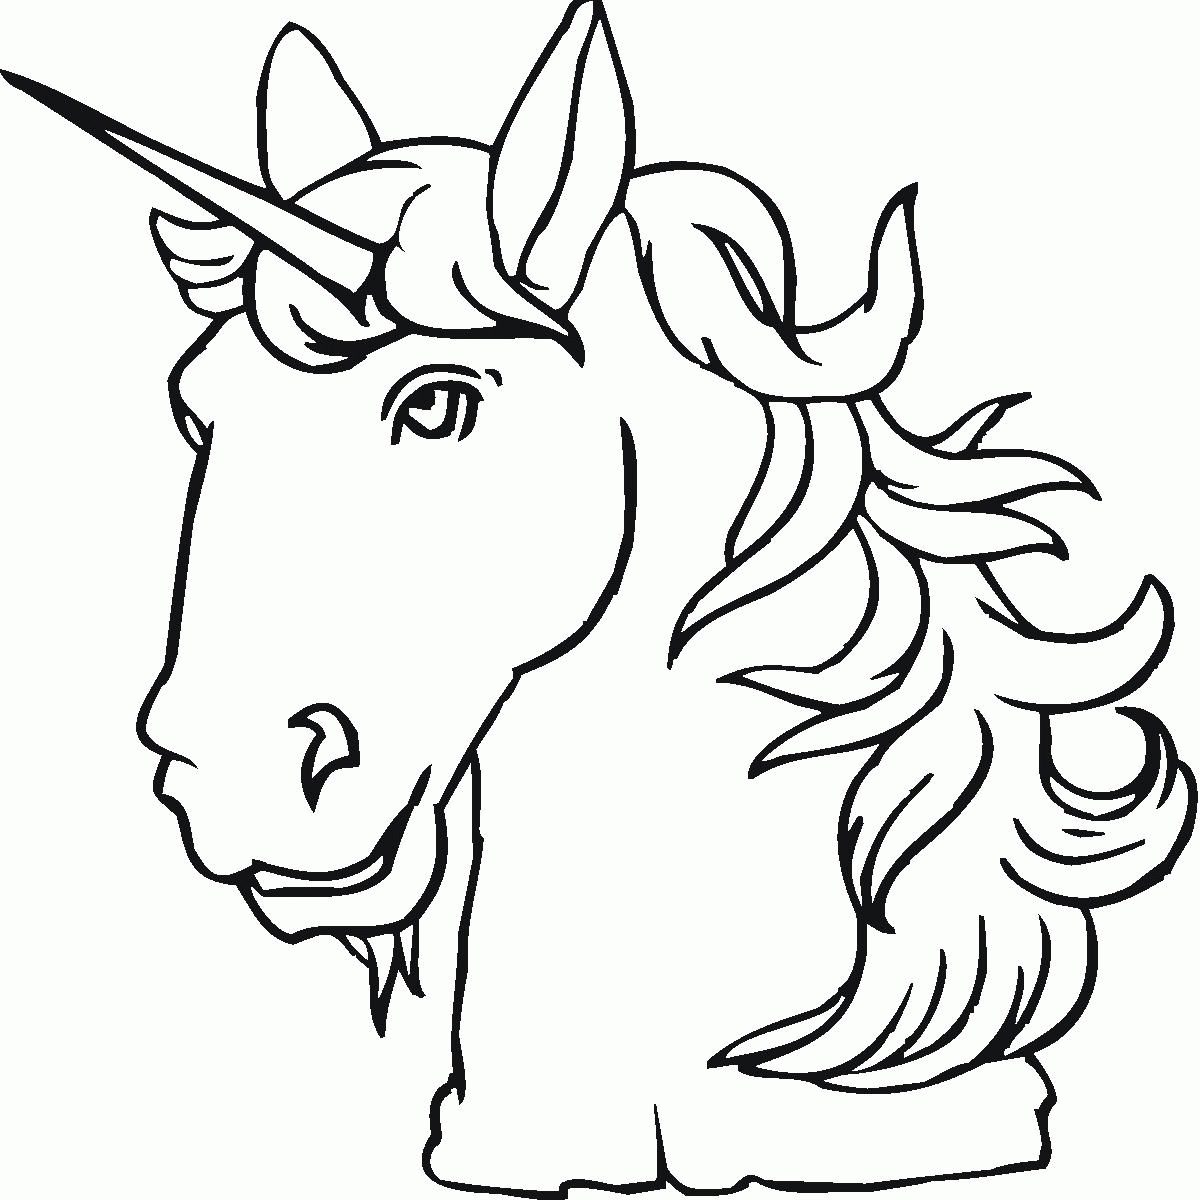 Free Unicorn Head Coloring Pages, Download Free Unicorn Head Coloring